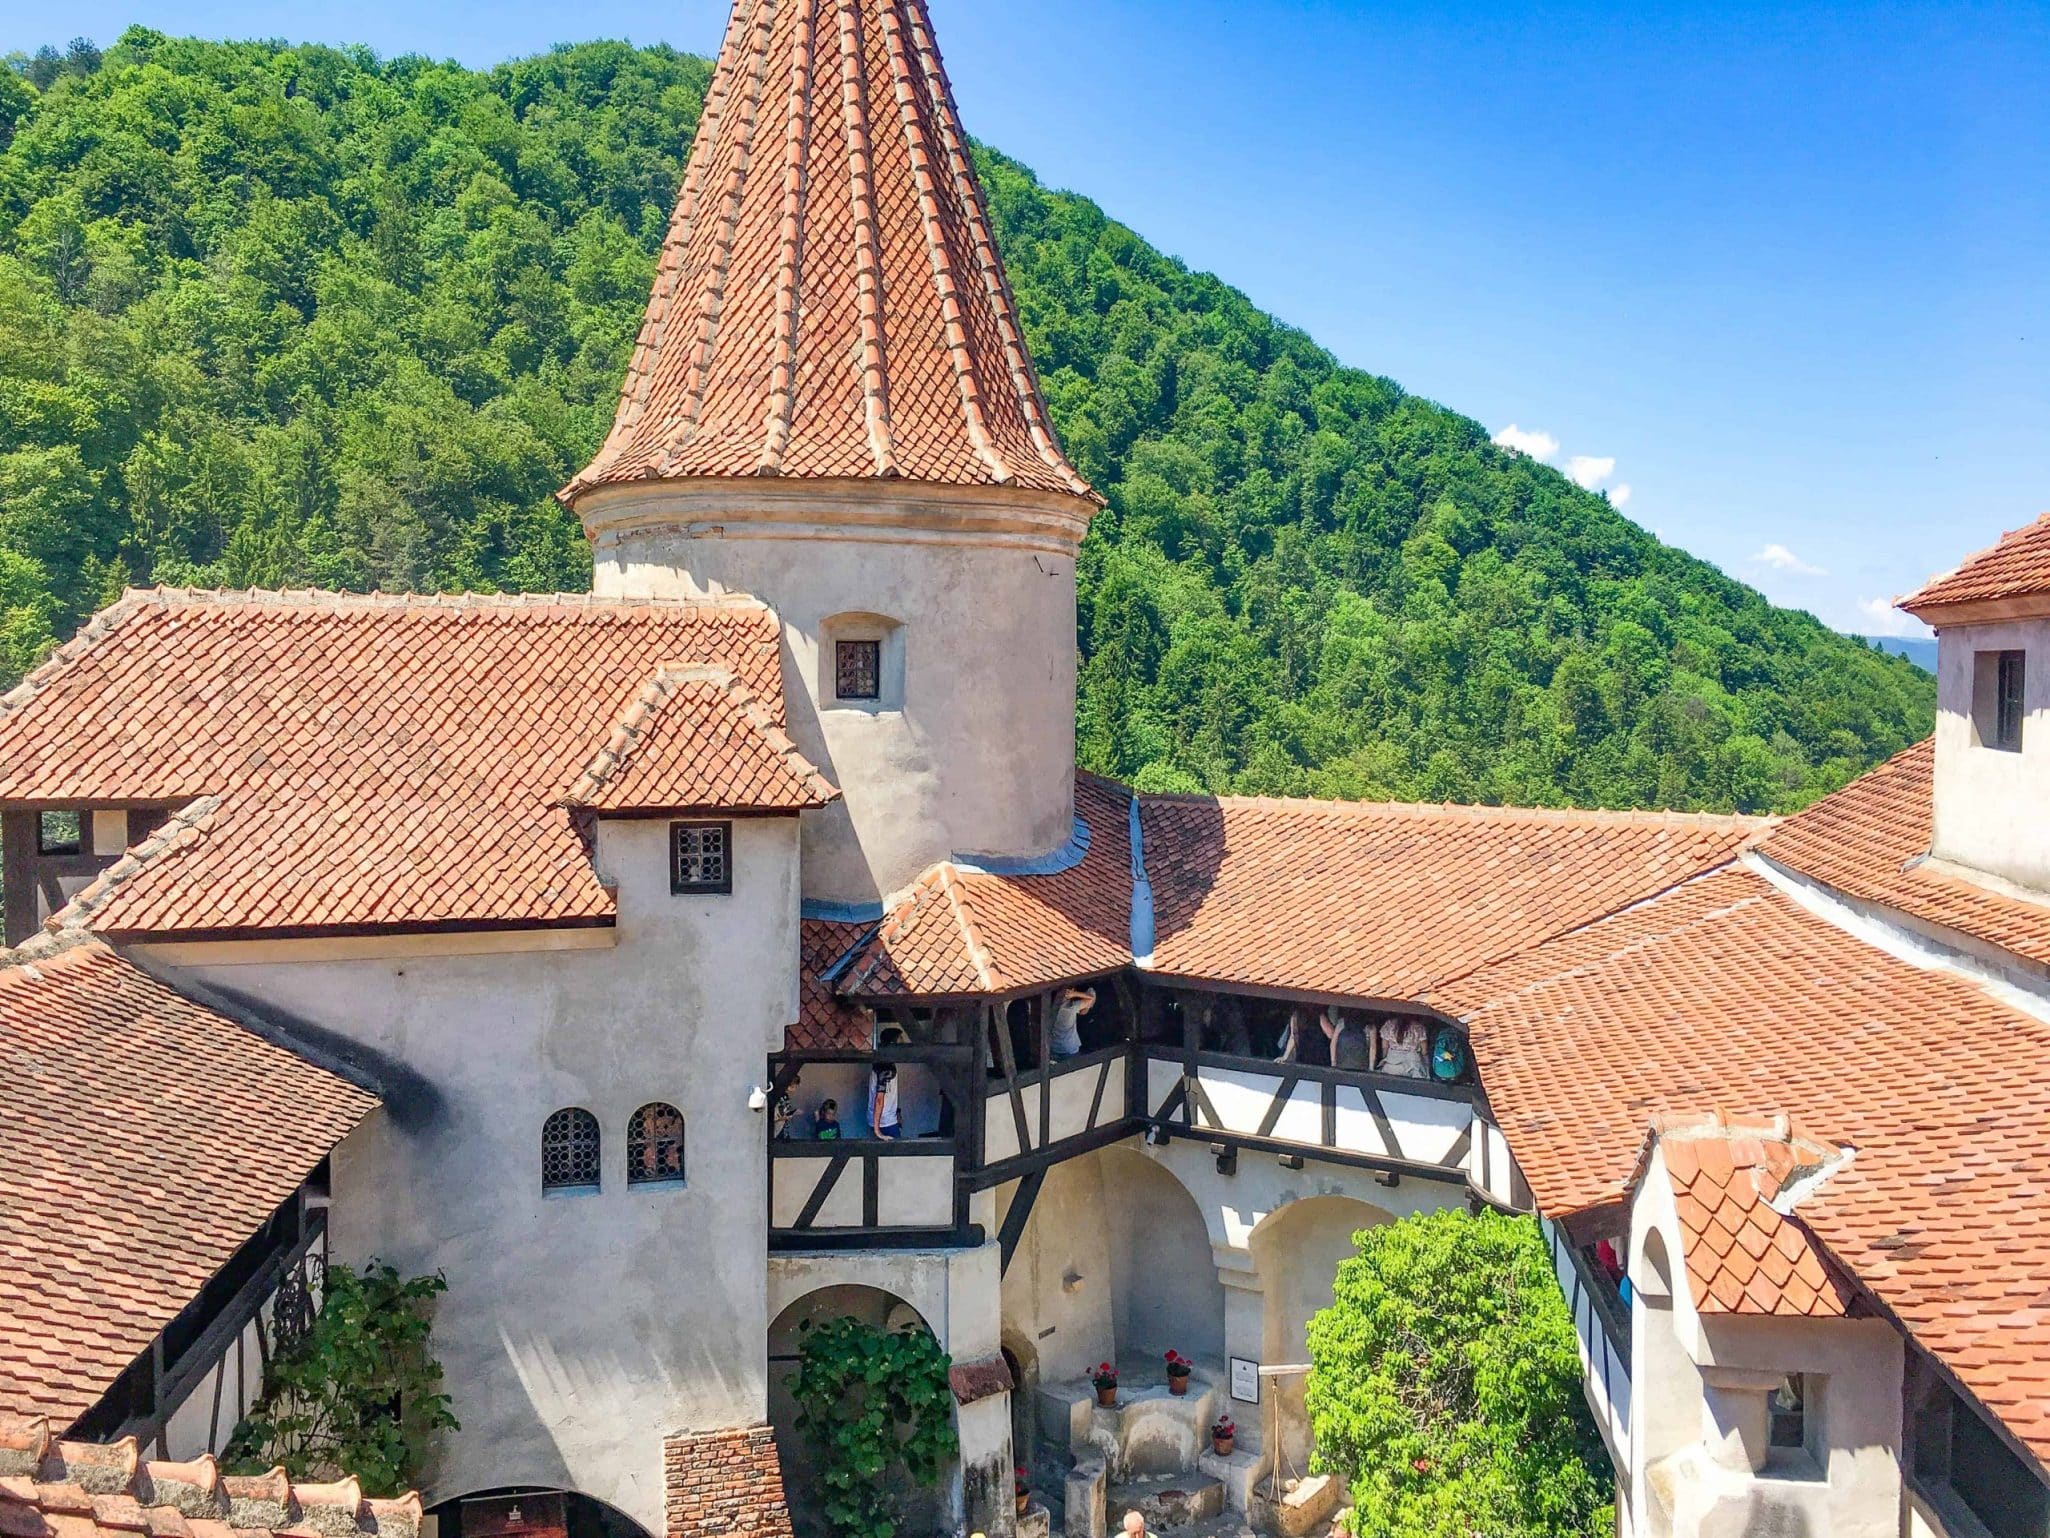 4 simple ways to get from Brasov to Bran Castle (Dracula’s castle)